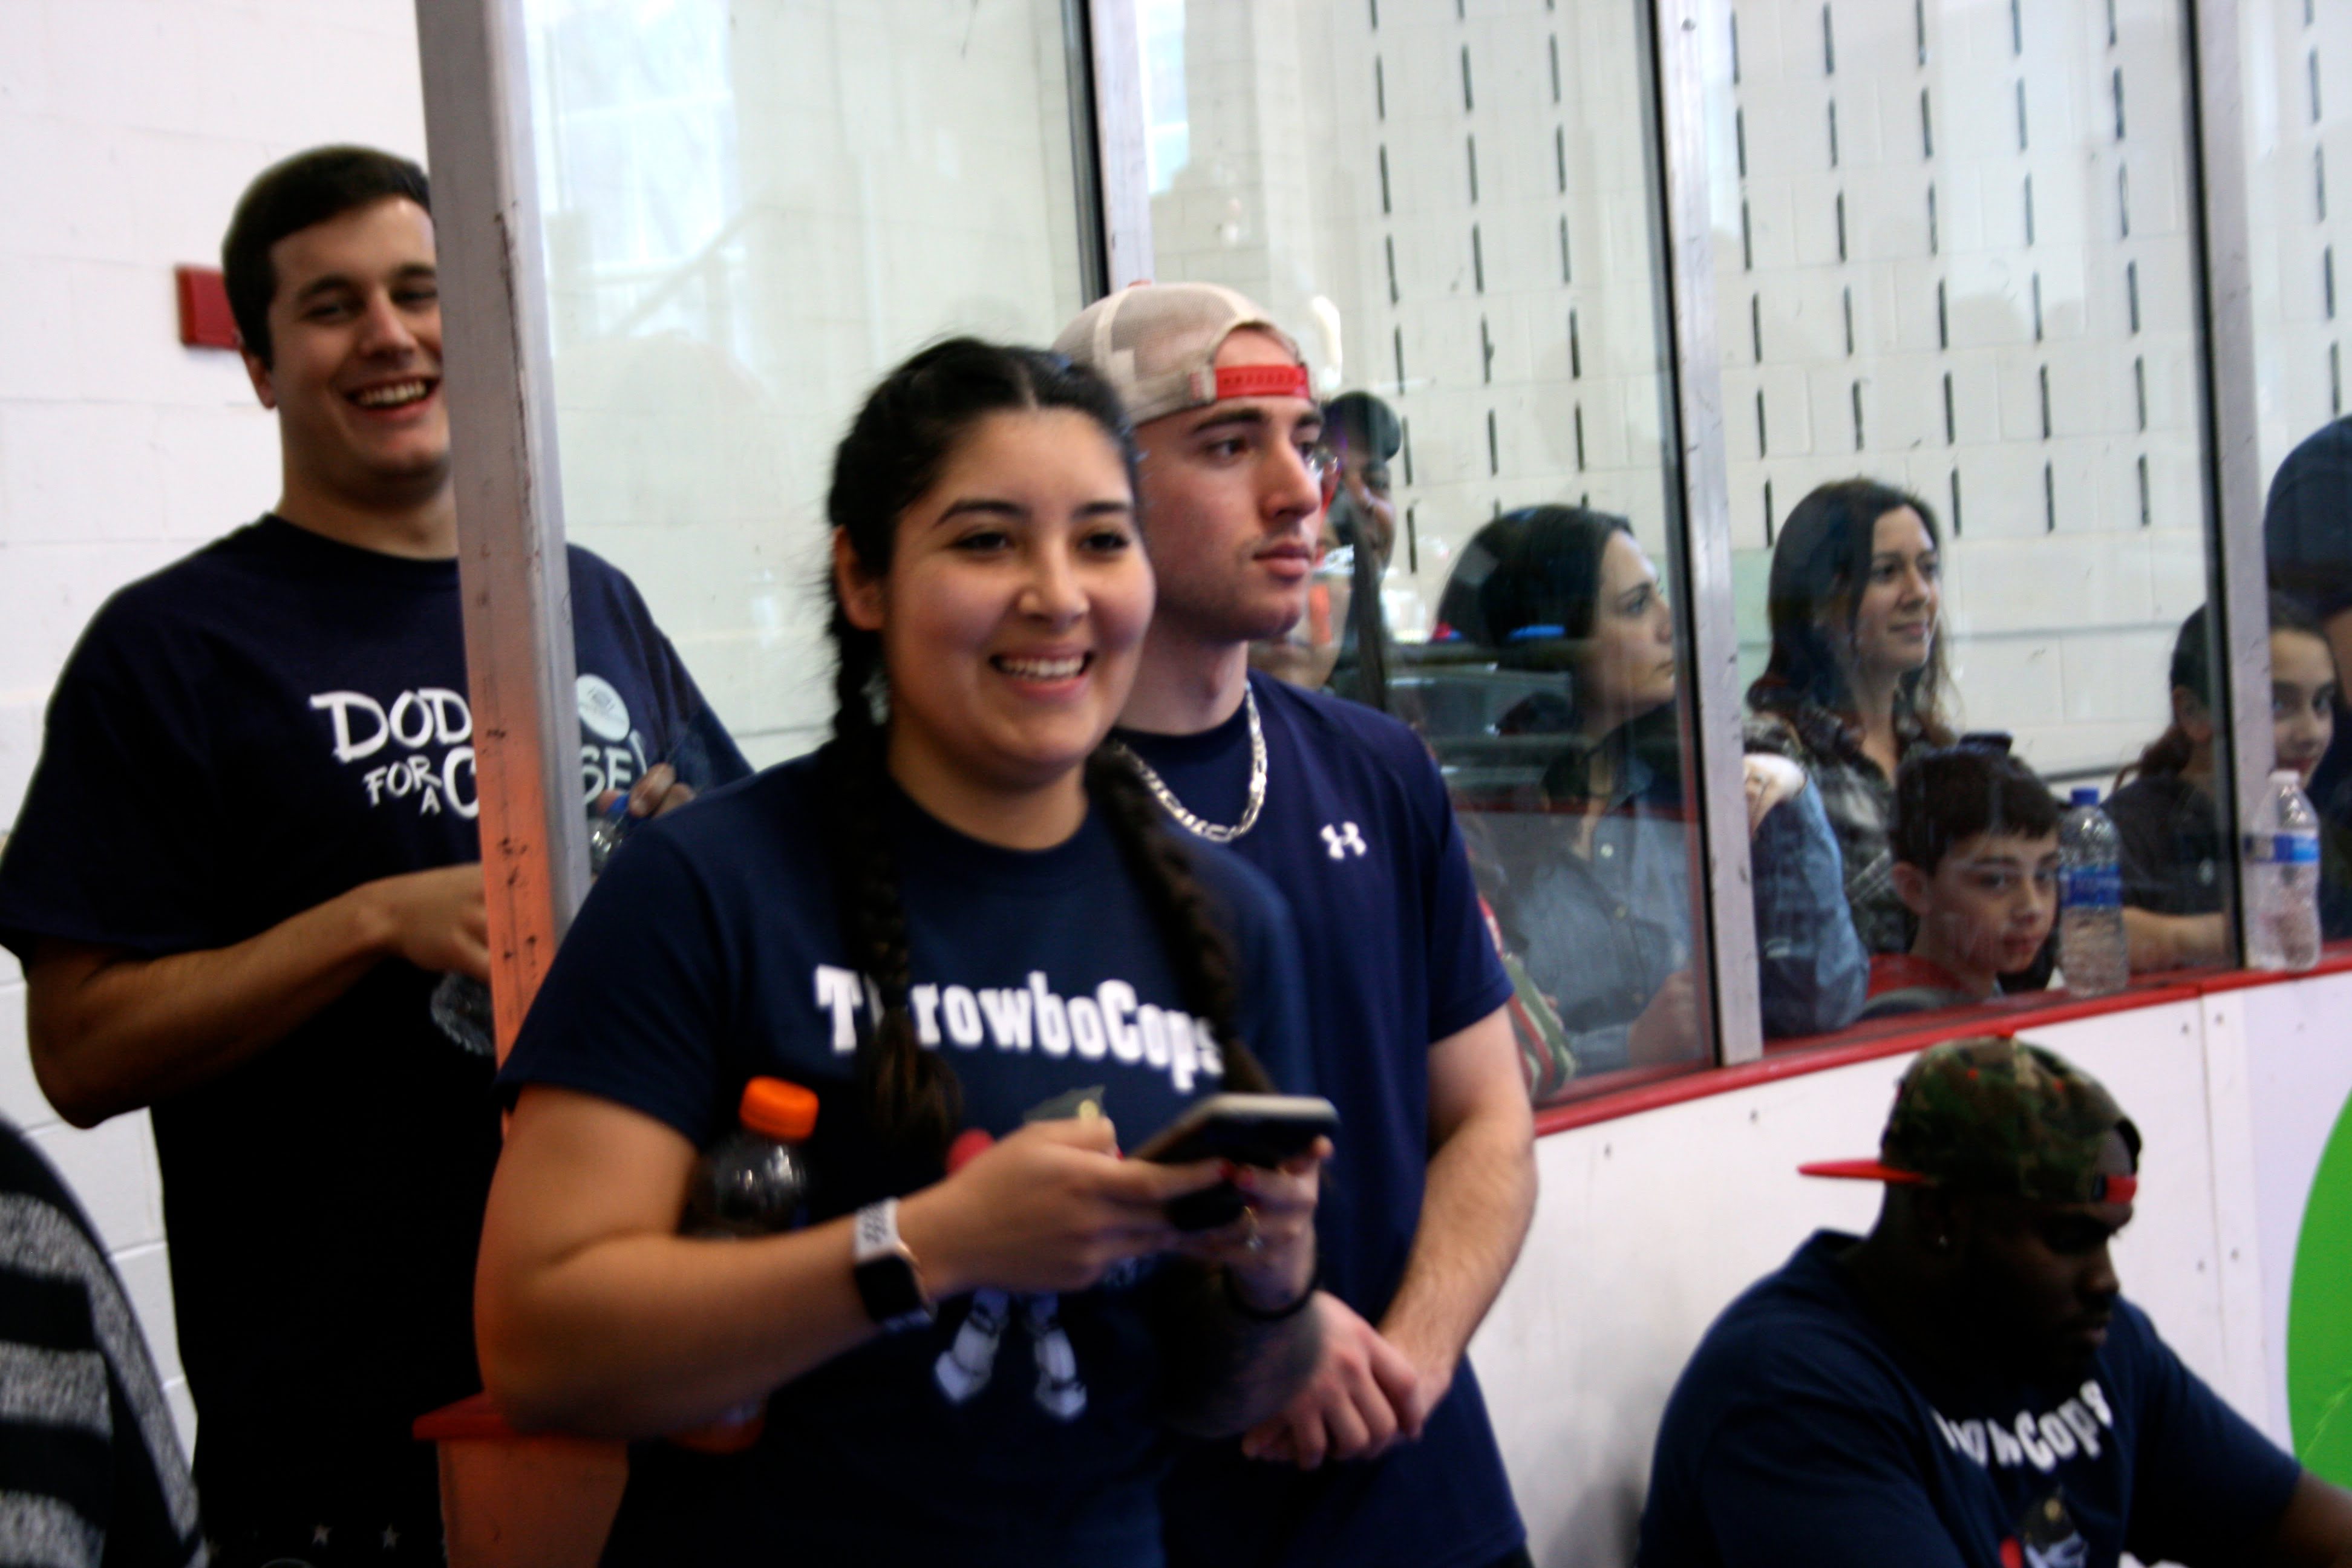 Greenwich Police Officer Erika Garcia at the third annual dodge ball tournament at the Boys & Girls Club of Greenwich. March 14, 2018 Photo Heather Brown